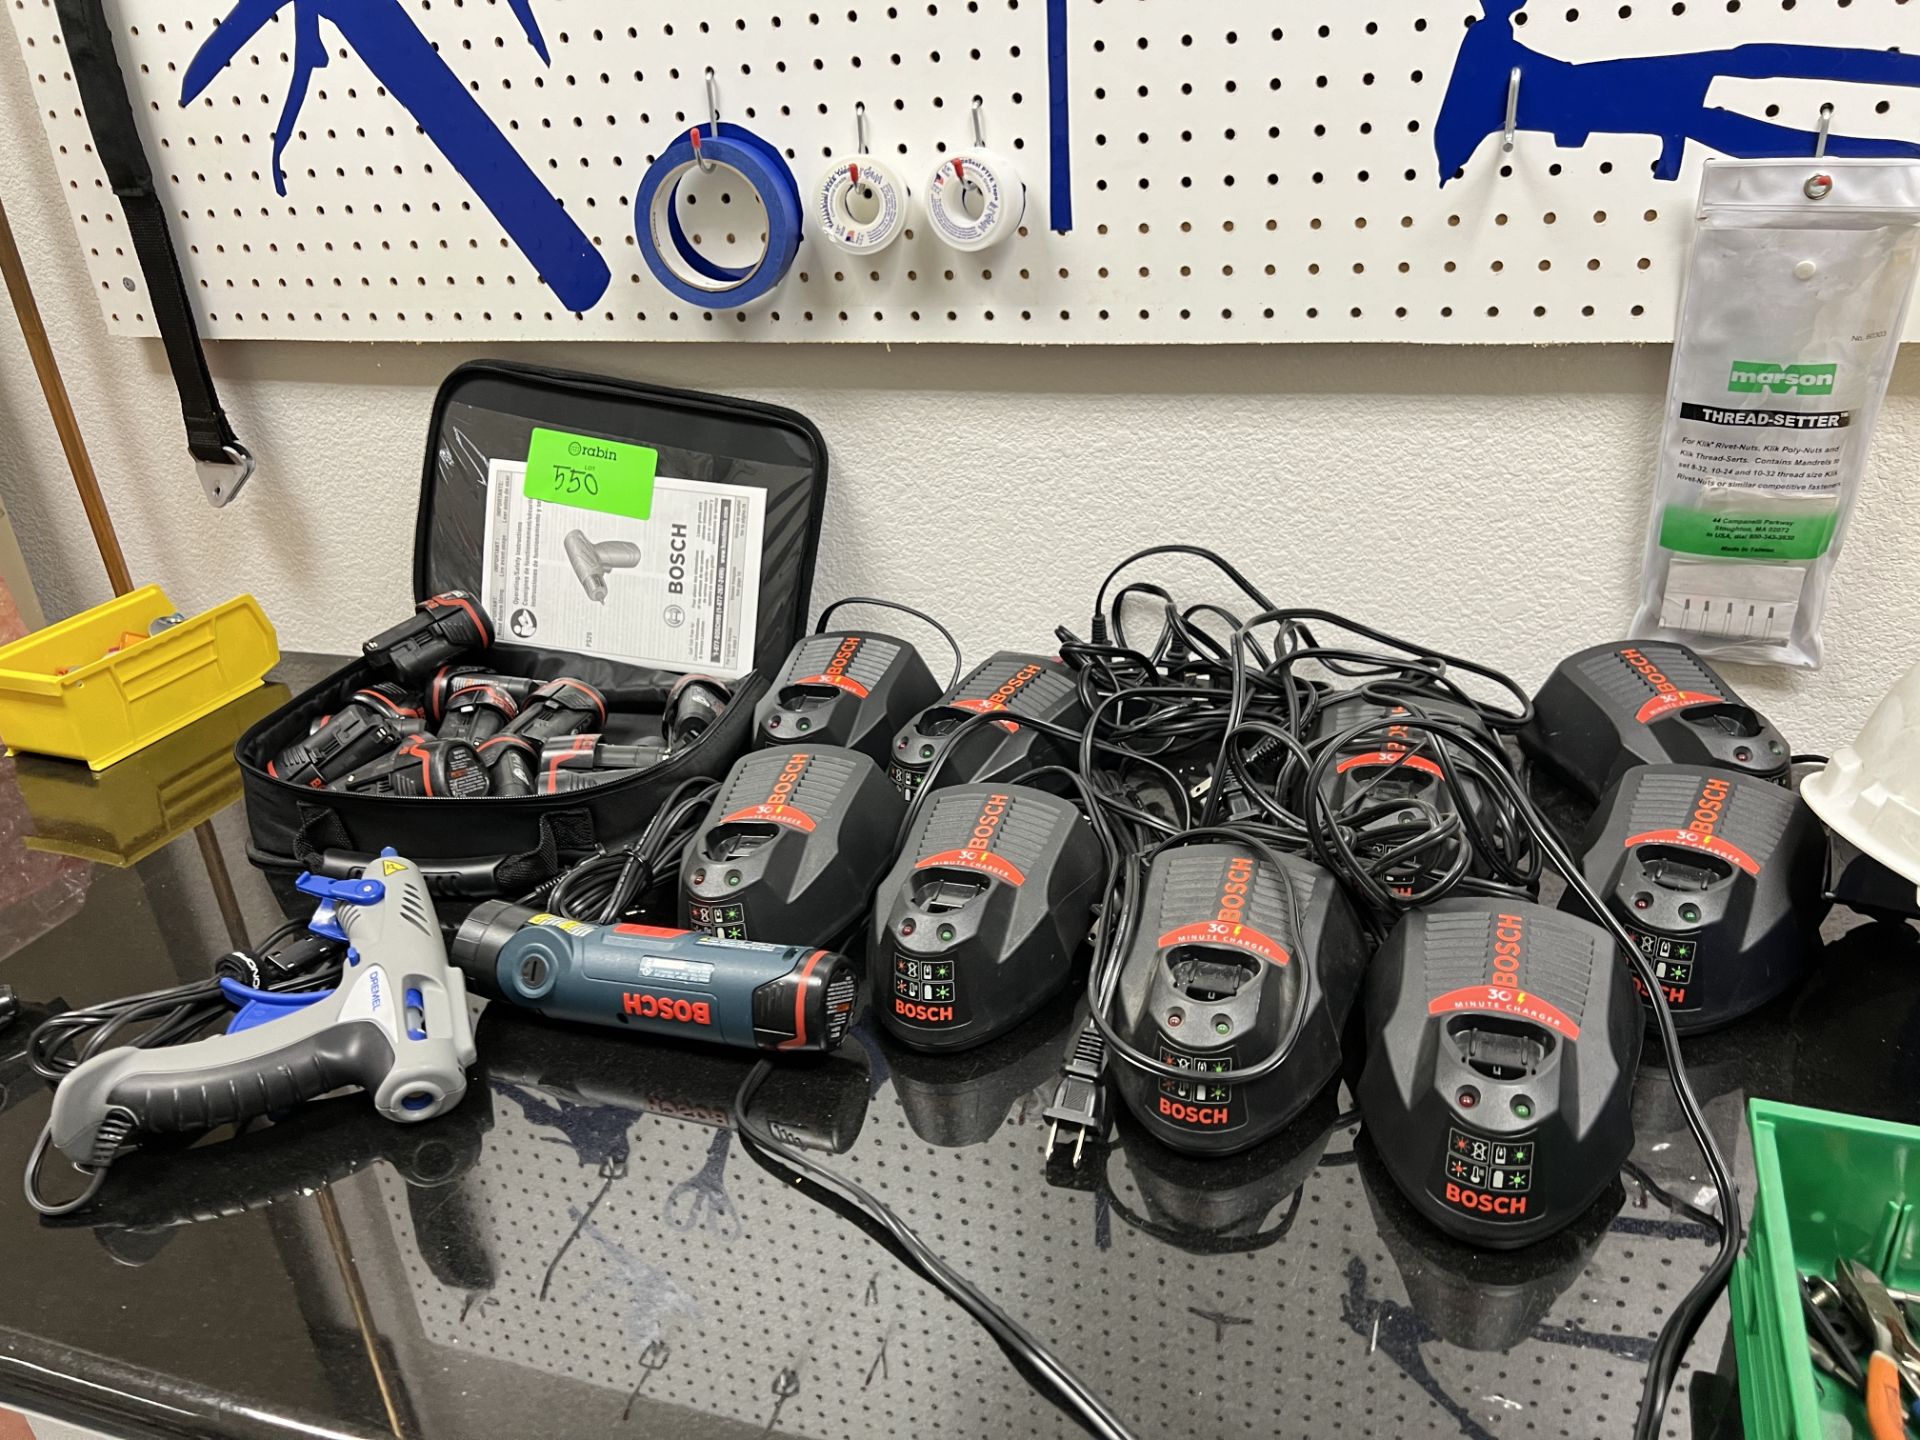 Tool, Chargers and Batteries